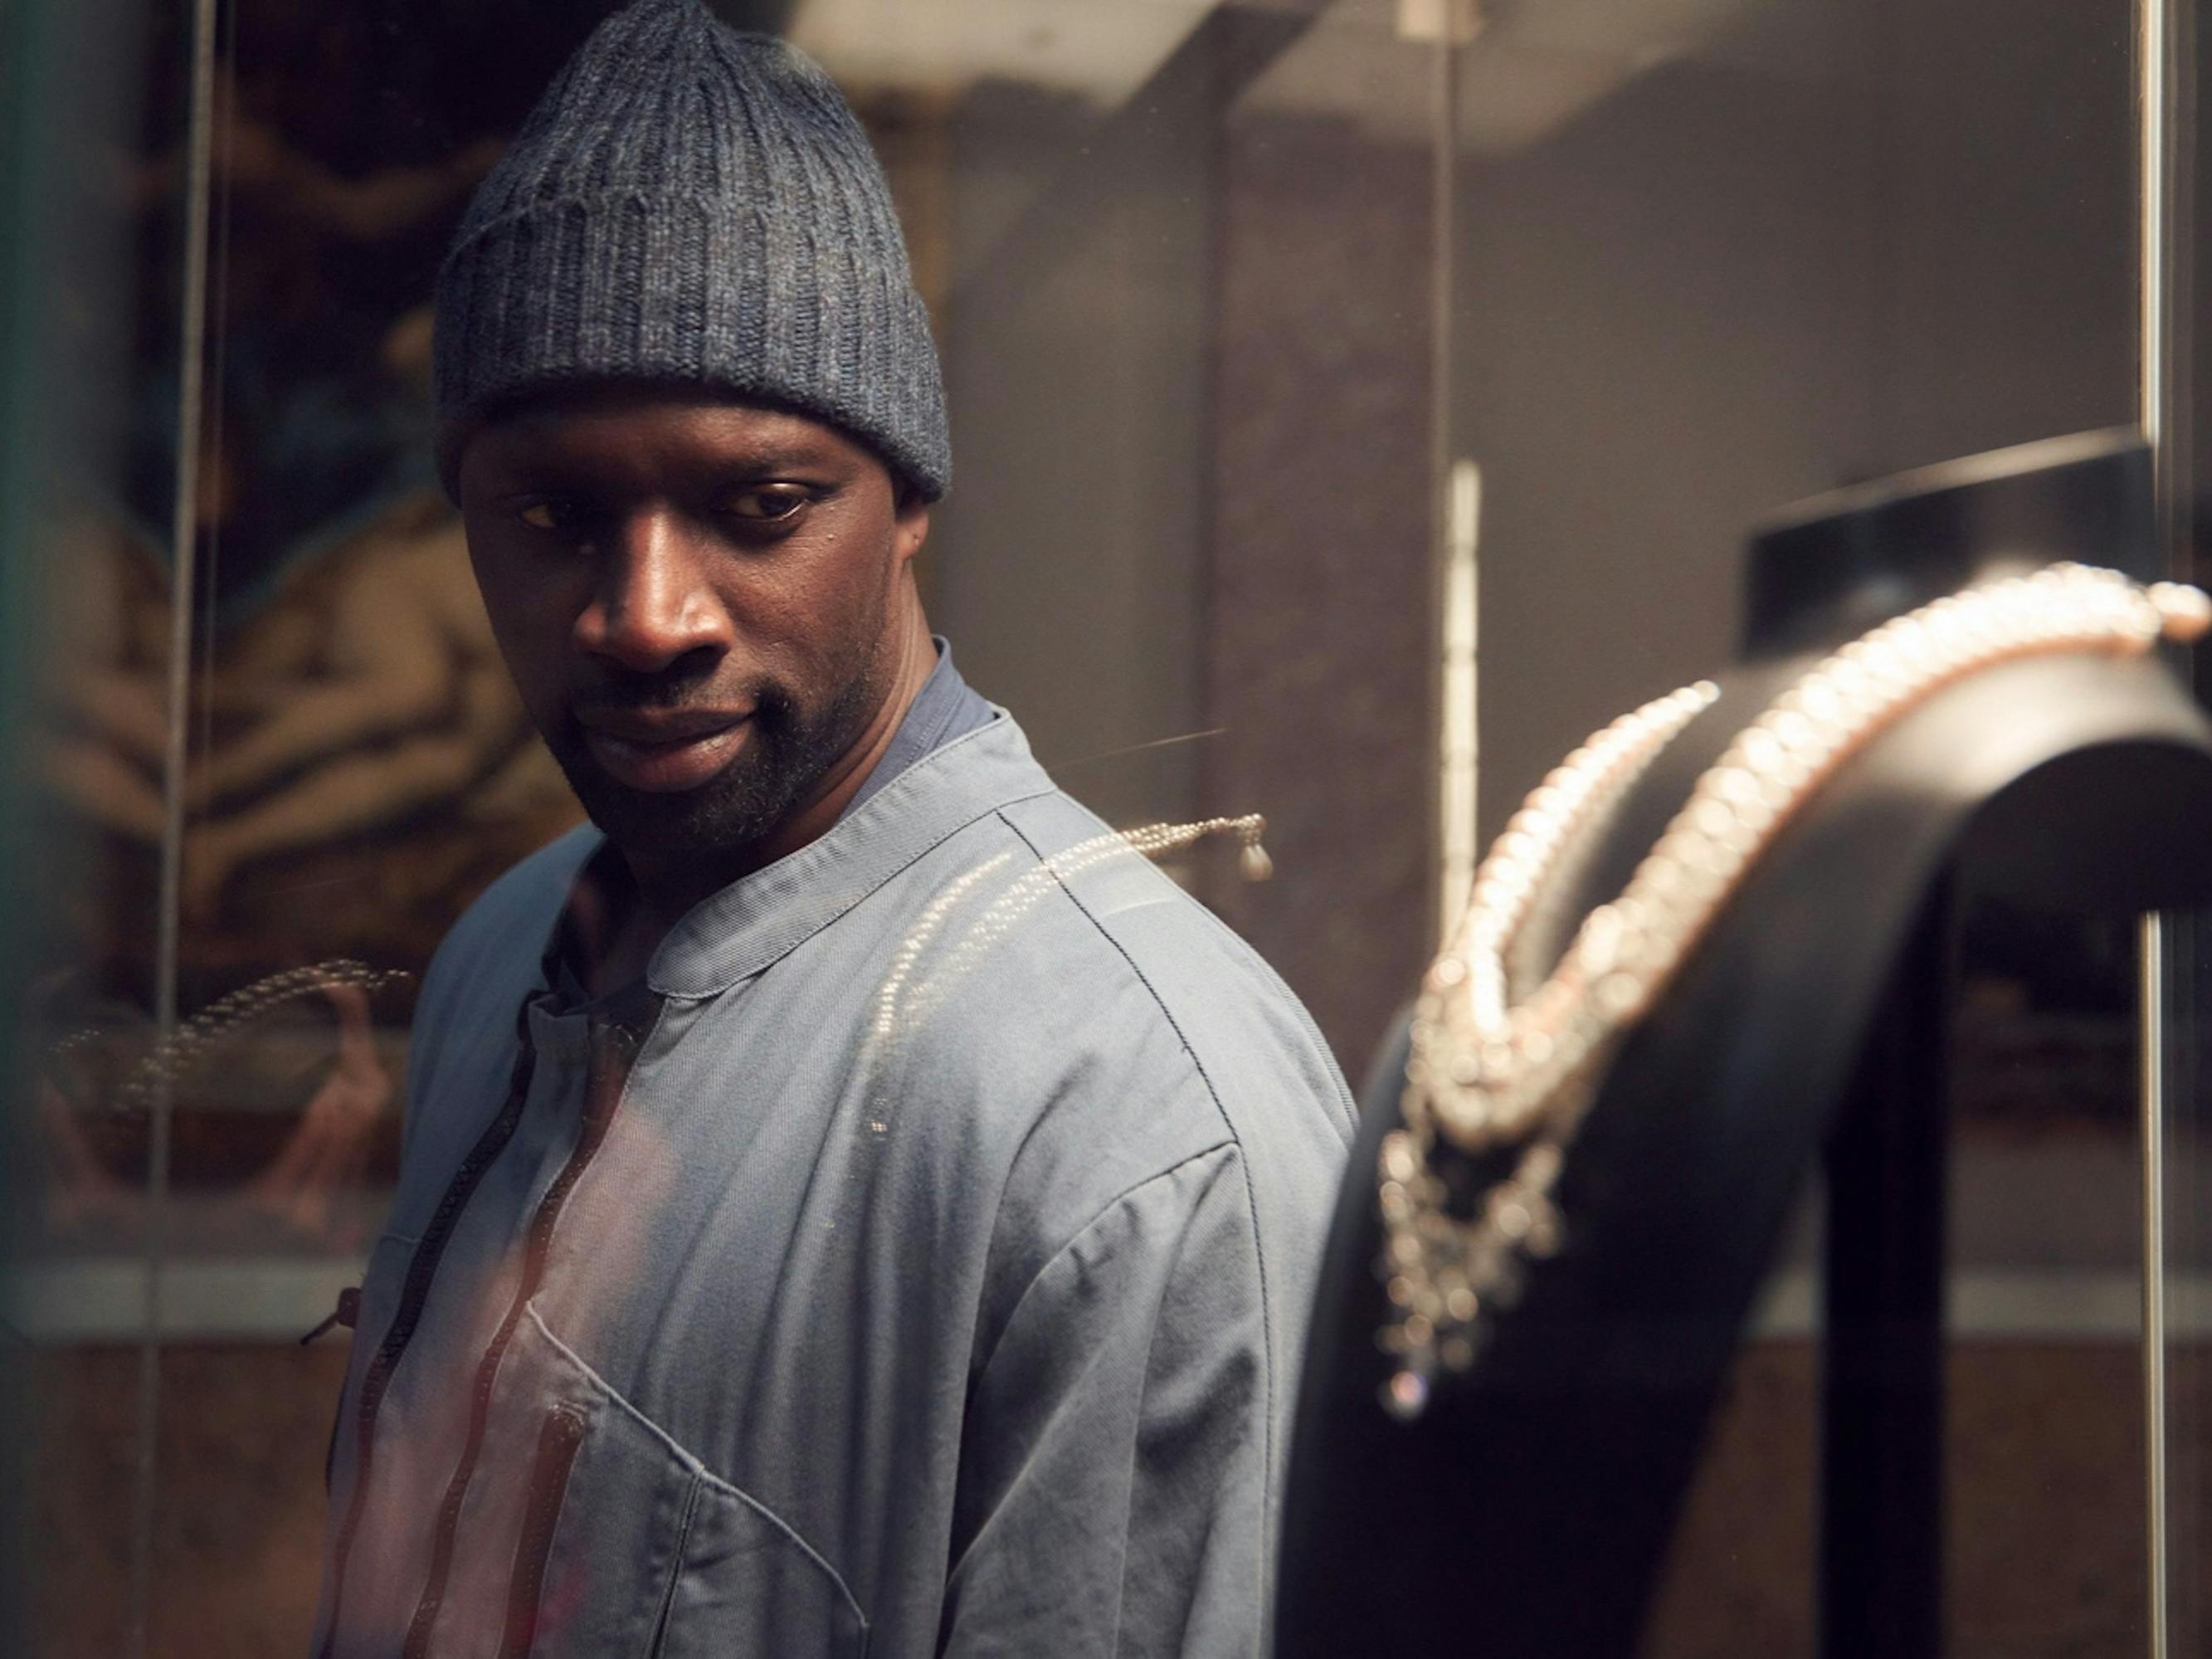 Assane Diop (Omar Sy) looks at a necklace on a black mannequin enclosed in a glass box. Sy wears a grey jacket and wool hat.